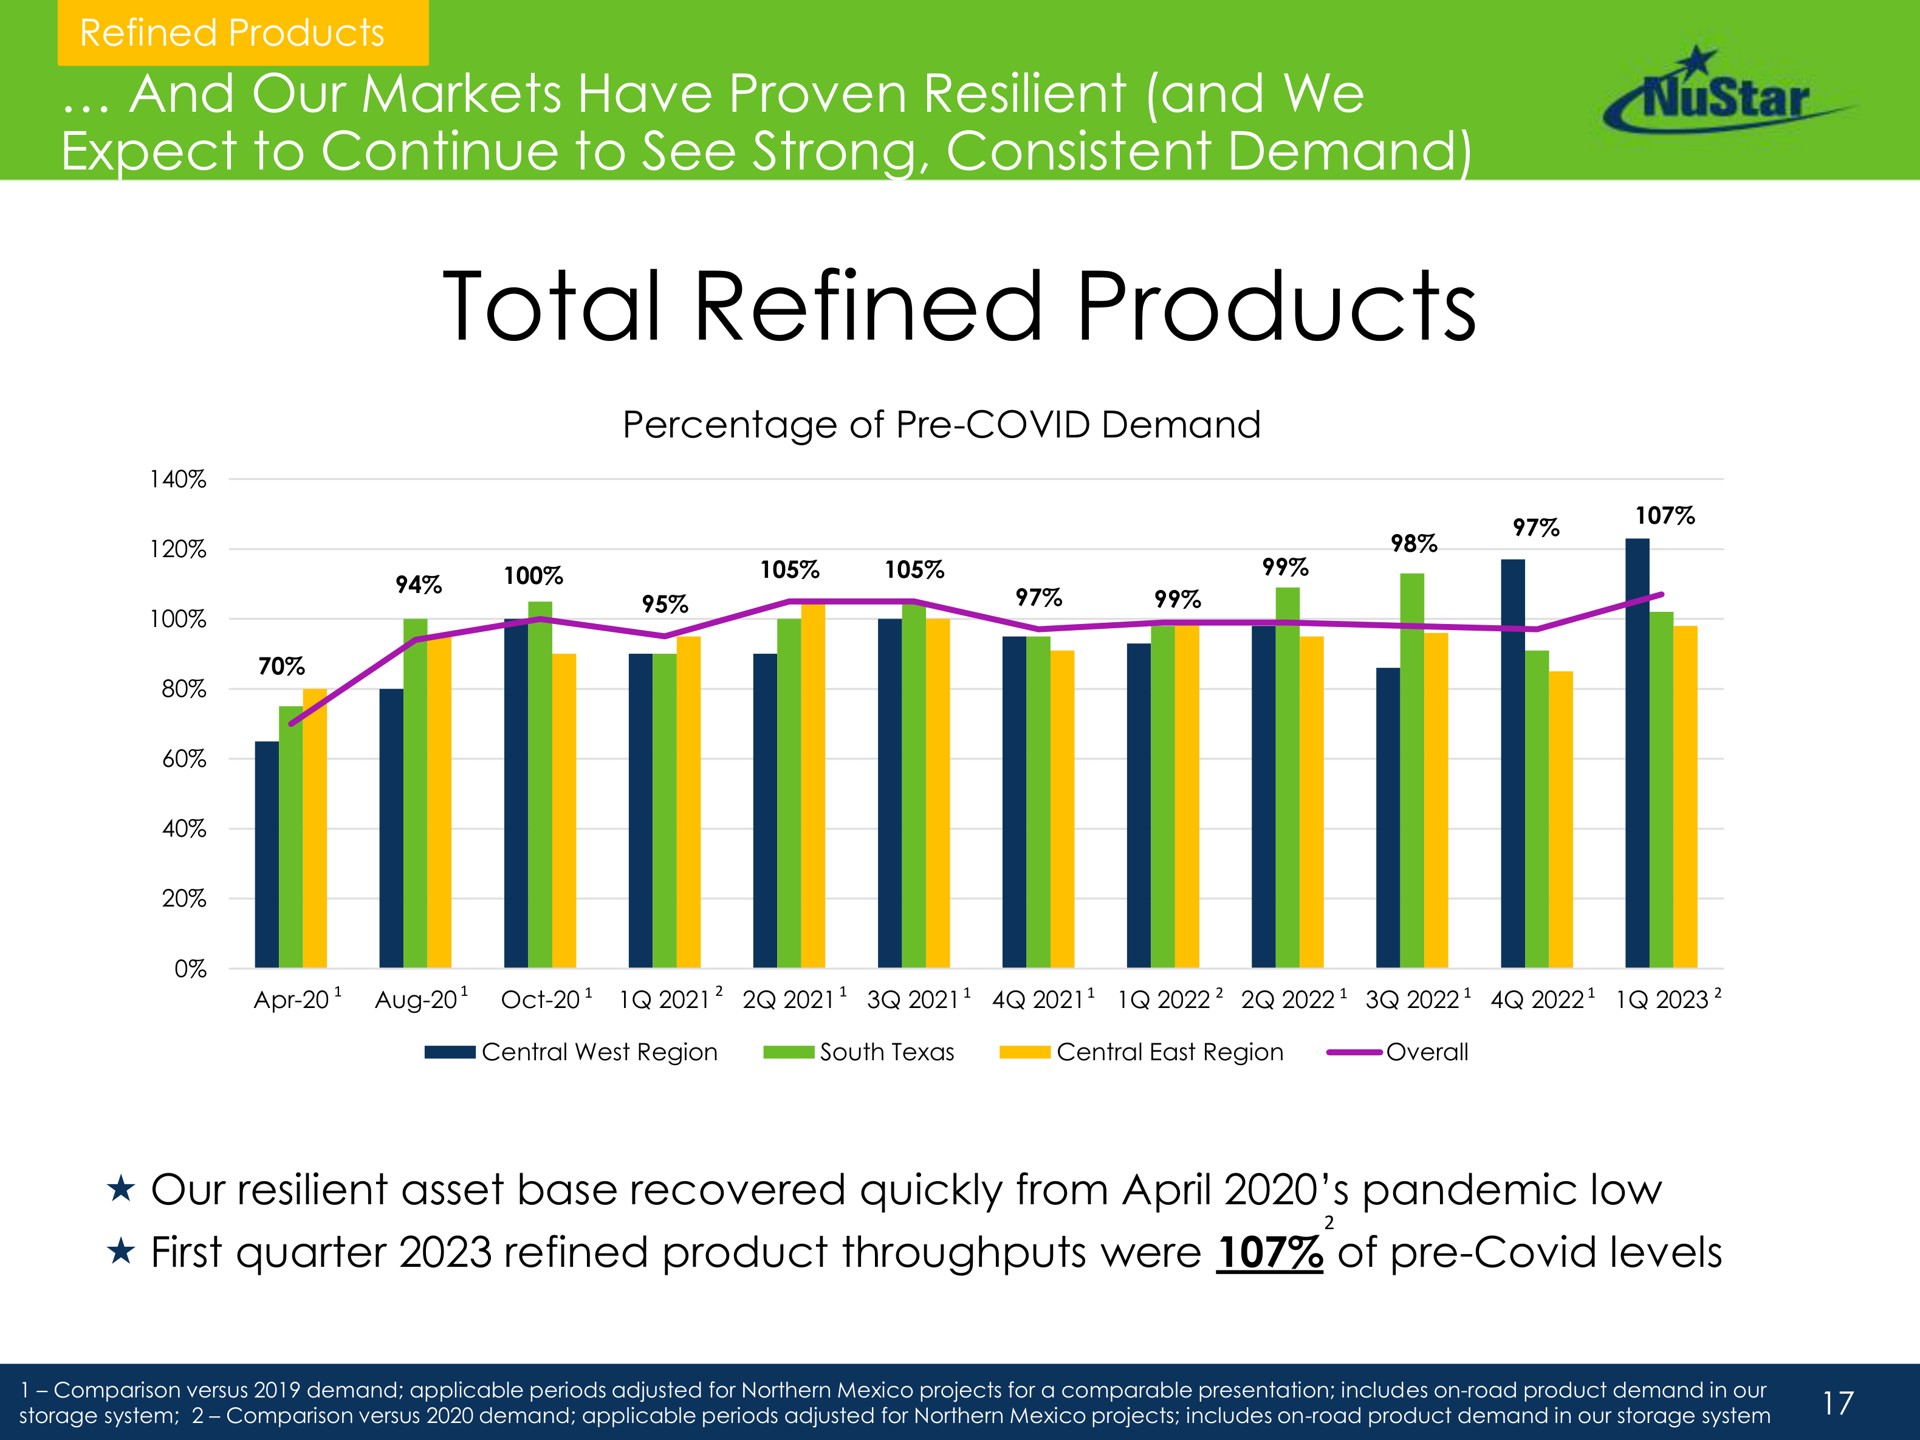 and our markets have proven resilient and we expect to continue to see strong consistent demand total refined products asset base recovered quickly from pandemic low | NuStar Energy